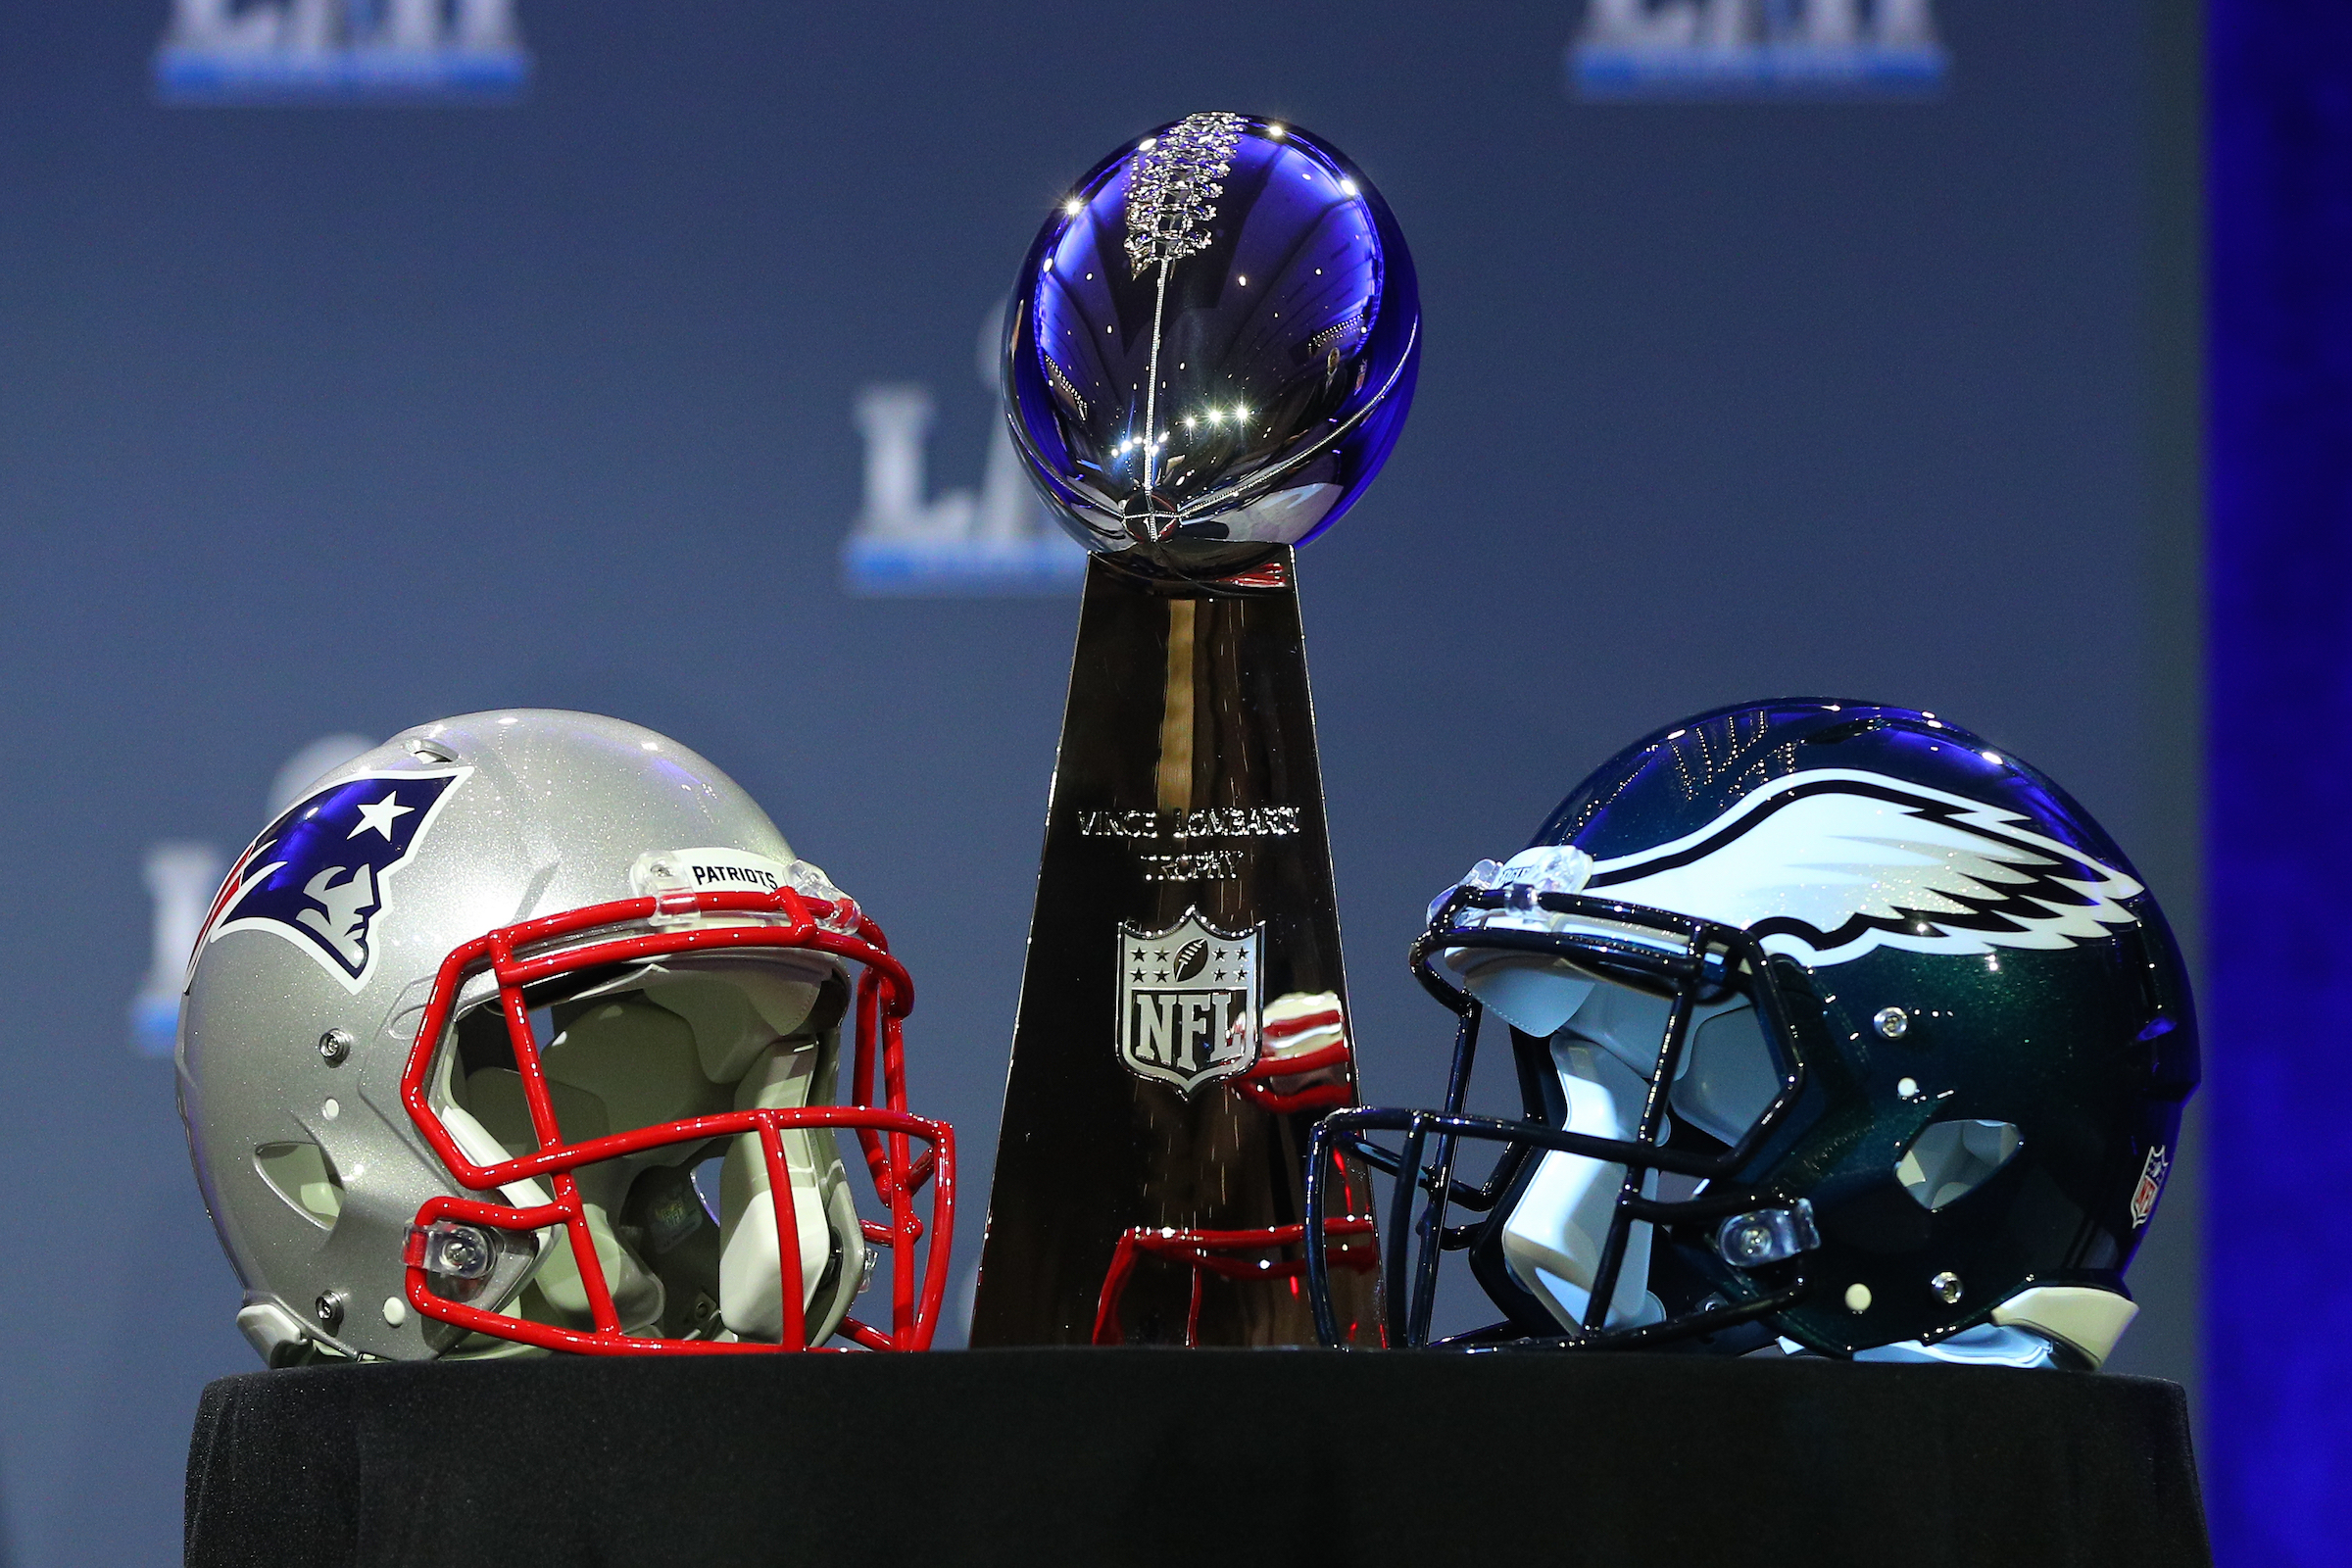 The Vince Lombardi Trophy and the New England Patriots helmet and the Philadelphia Eagles helmet on display at the Commissioners Press Conference on January 31, 2018, at the Hilton Minneapolis Grand Ballroom, in Minneapolis, MN.  (Photo by Rich Graessle/Icon Sportswire via Getty Images)